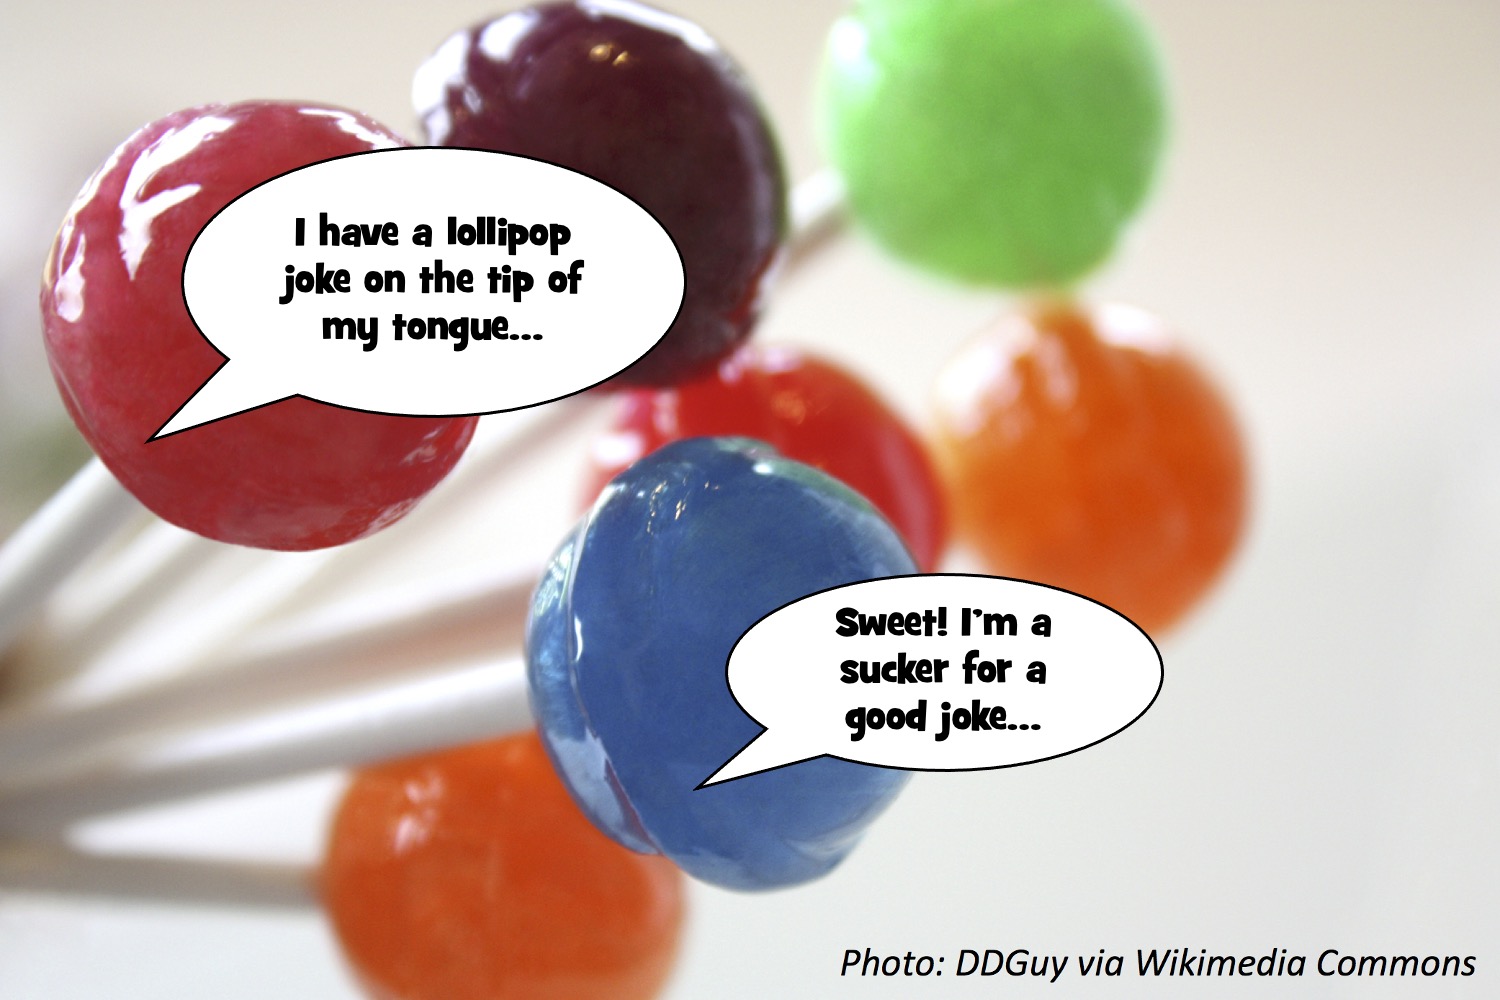 What do you wonder when you lick a lollipop? - Quora